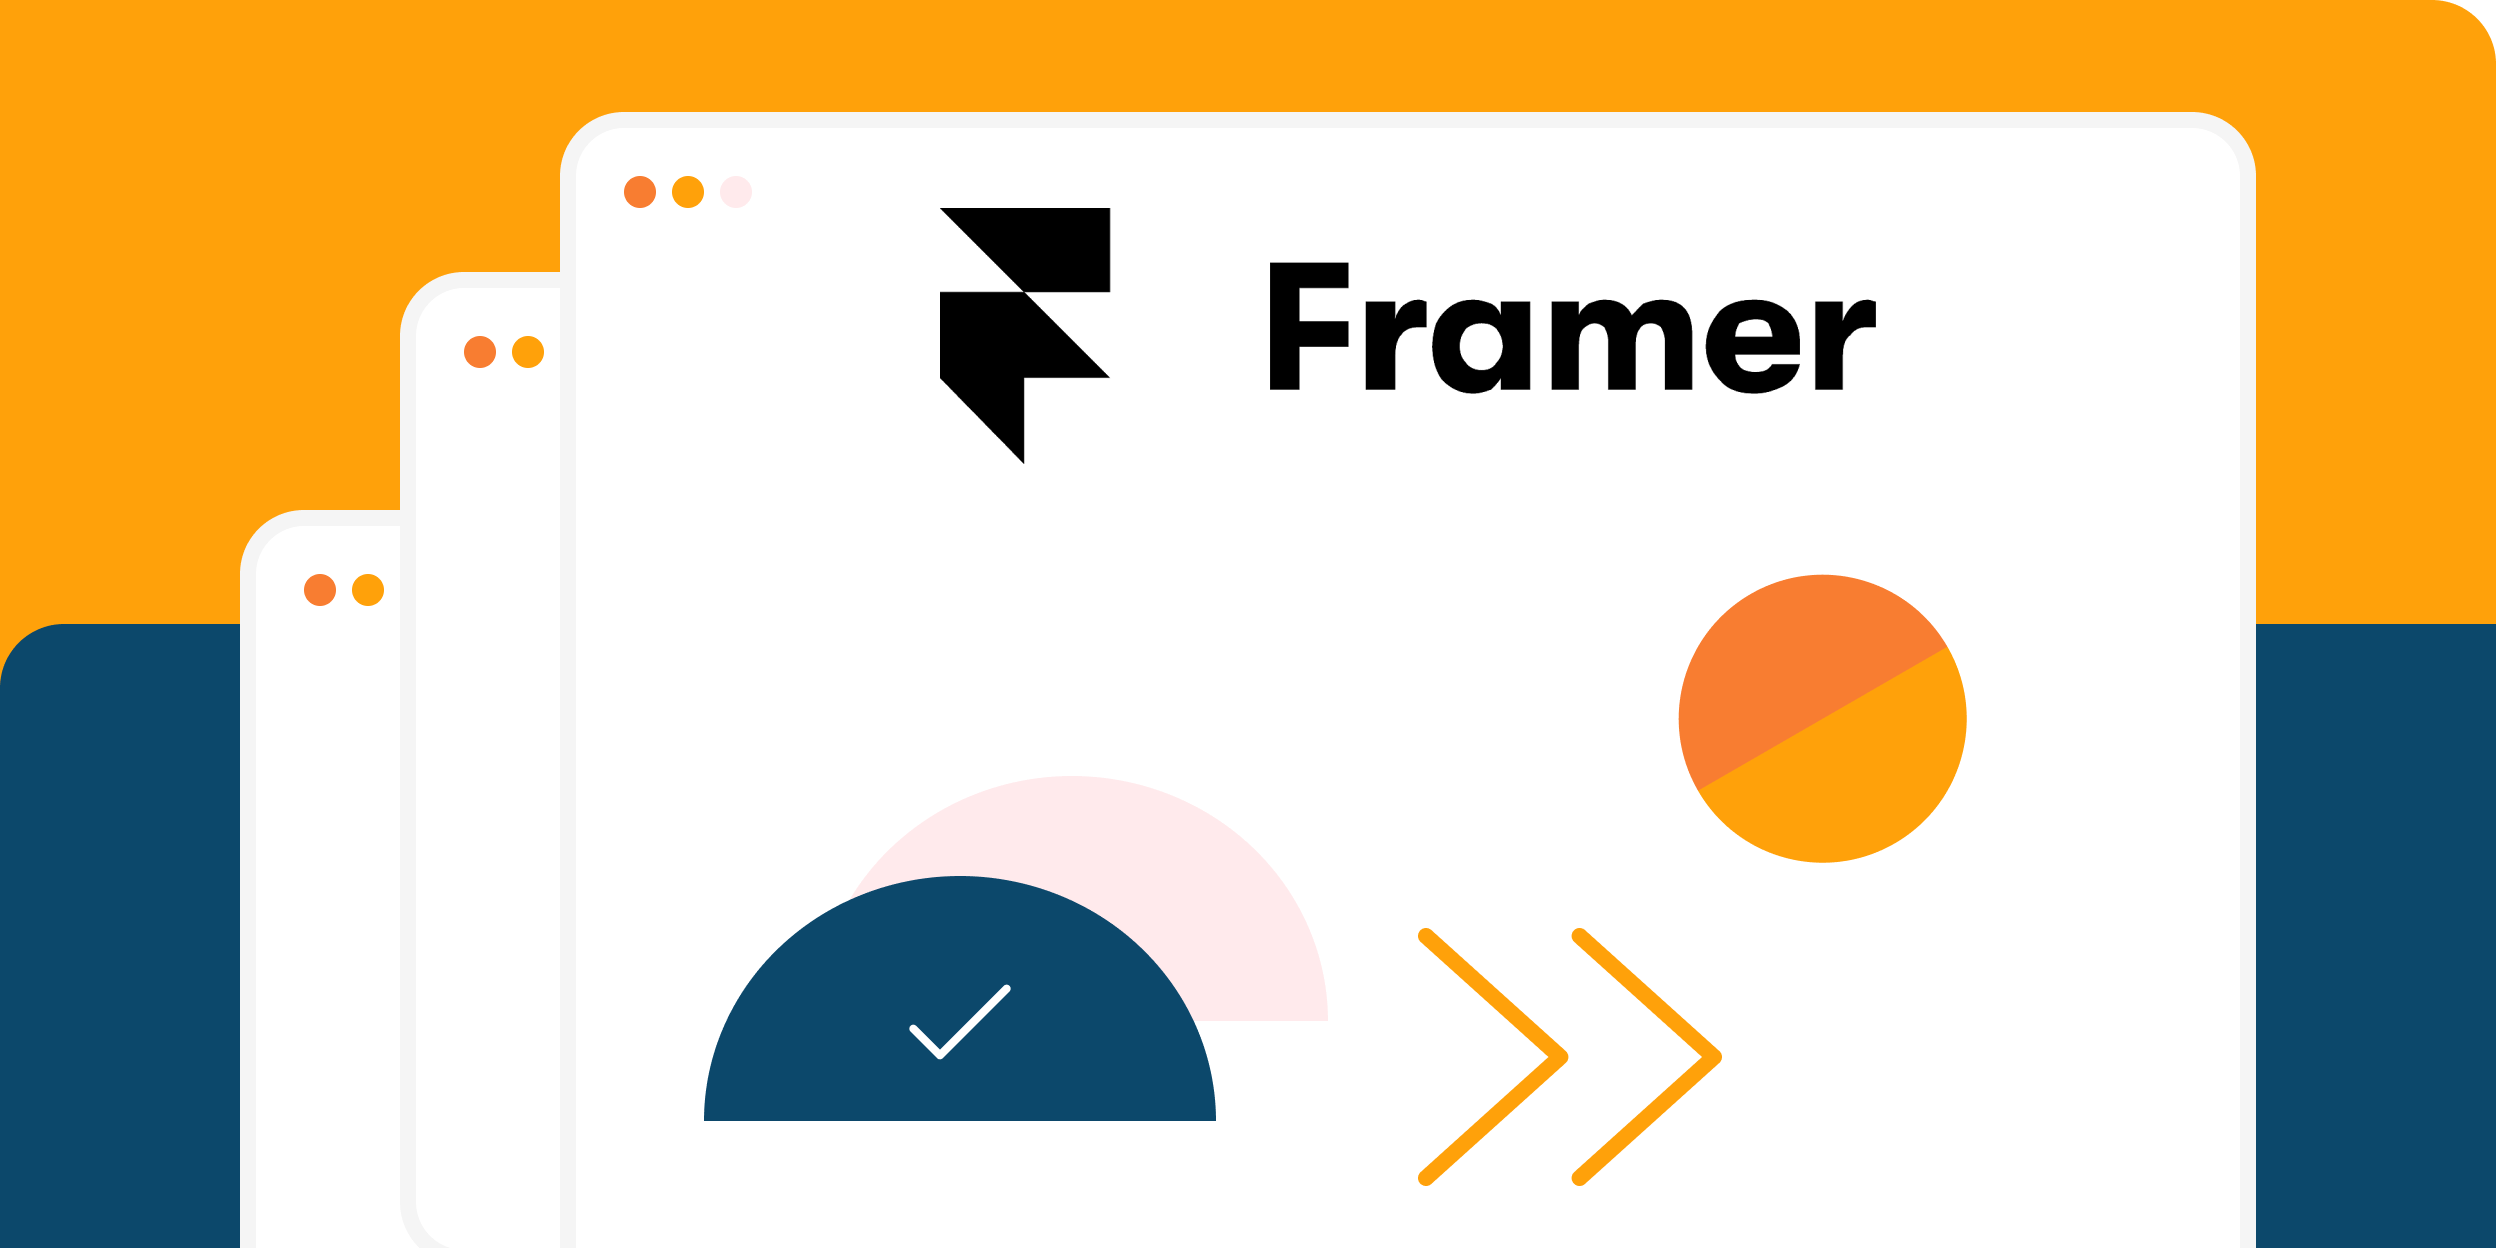 The ultimate guide to selling Framer templates - on their marketplace or from your own website